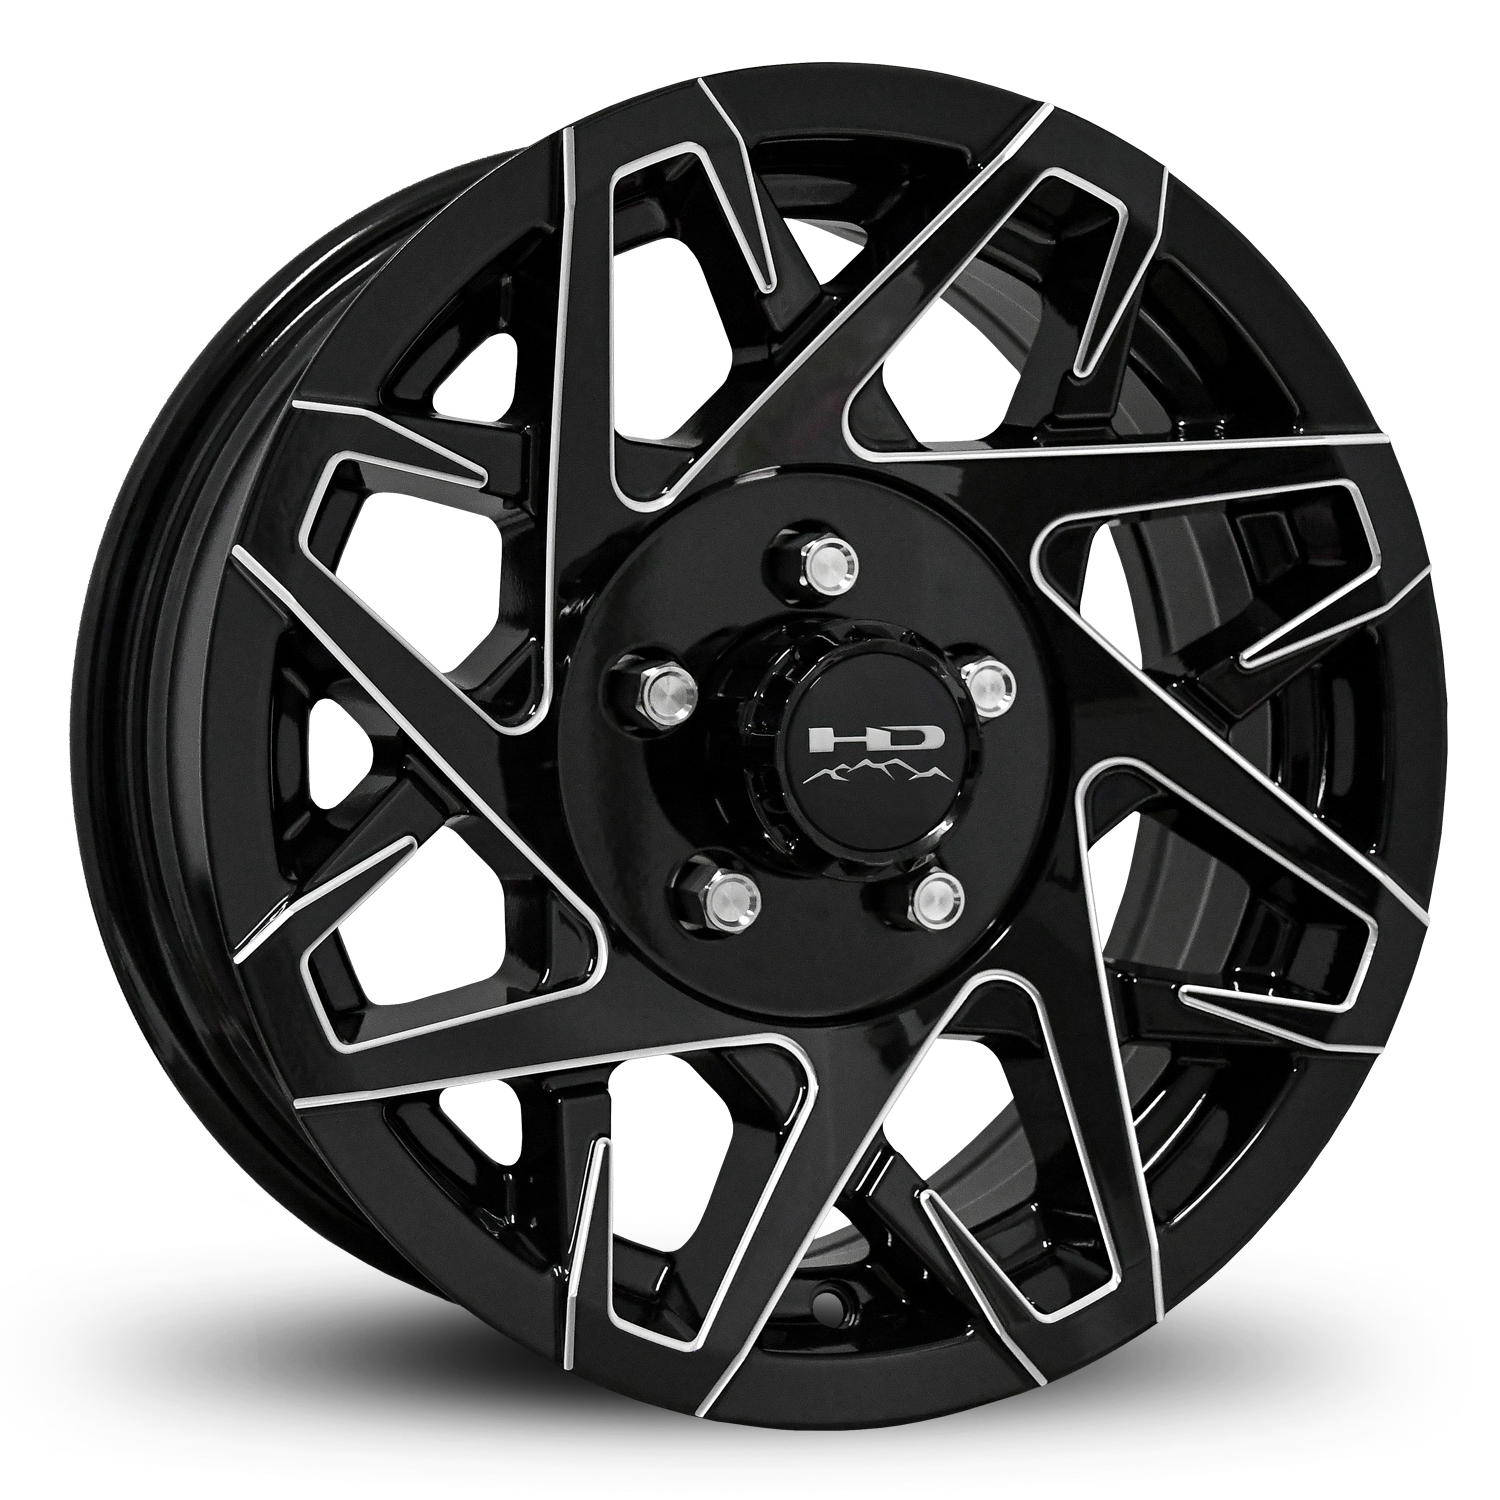 HD Off-Road Canyon Custom Trailer Wheel Rims in 14x5.5 Gloss Black CNC Milled Spoke Edges with Center Cap & Logo fits 5x4.50 / 5x114.3 Axle Boat, Car, RV, Travel, Concession, Horse, Utility, Lawn & Garden, & Landscaping.